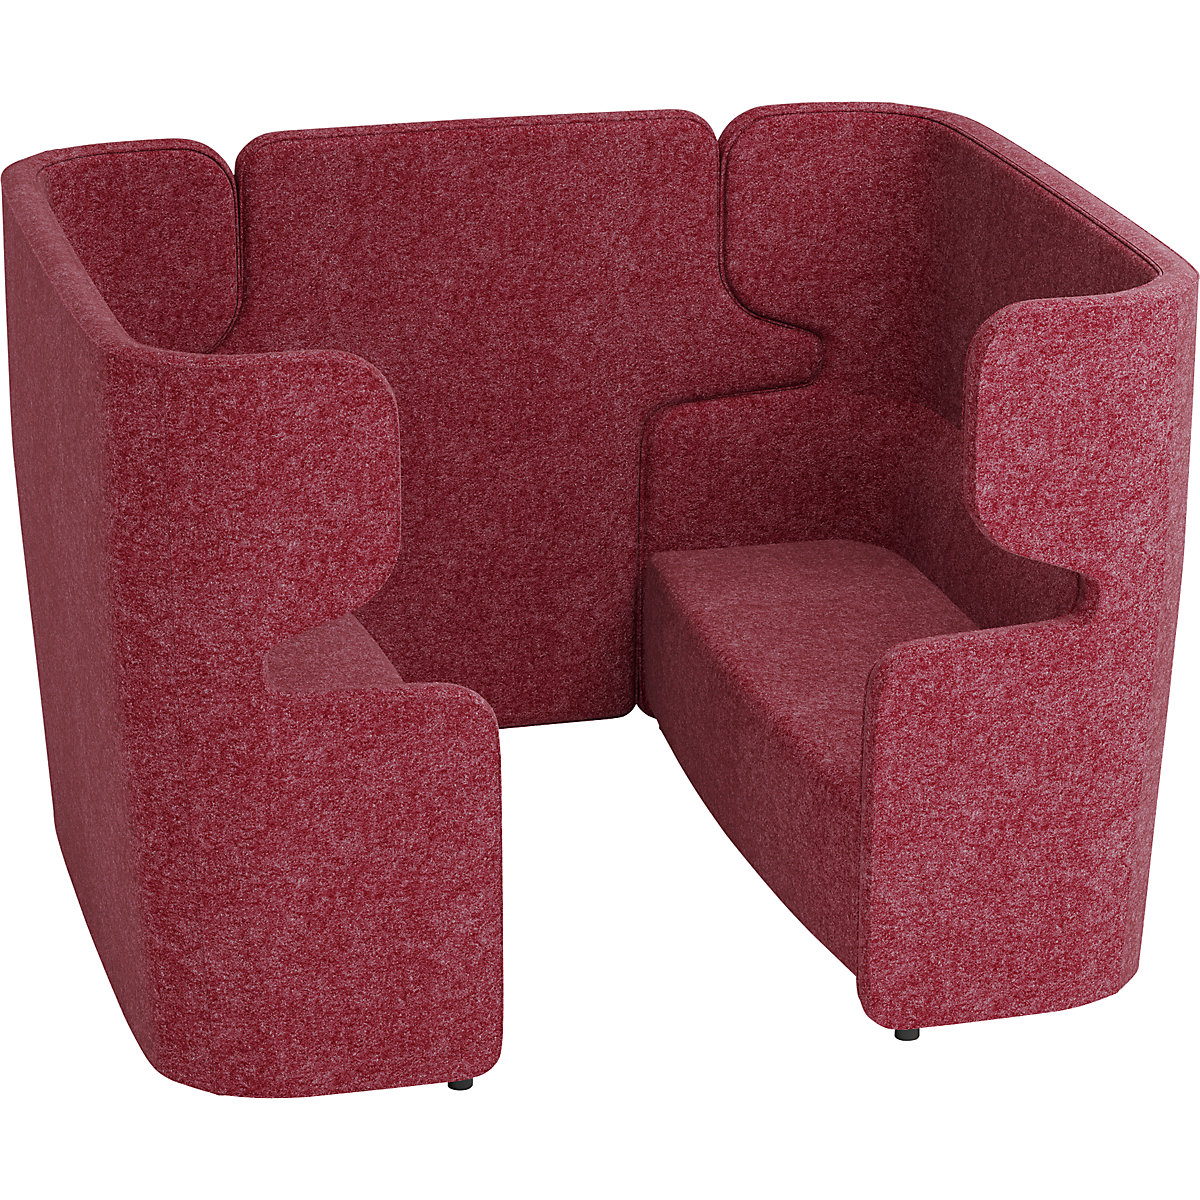 VIVO acoustic sofa – BISLEY, 2 two-seaters with high back rest, centre divider, red